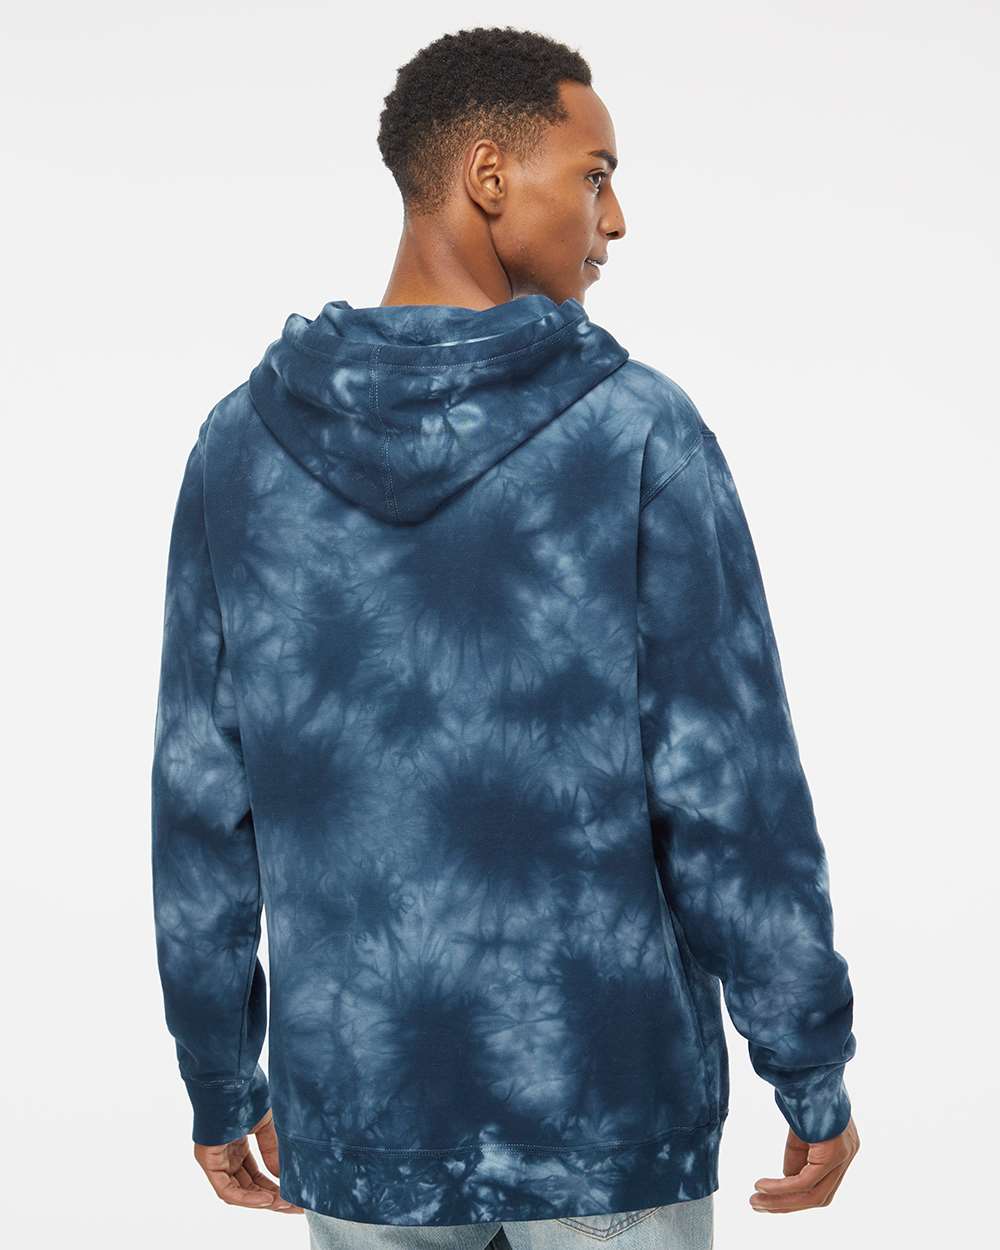 Independent Trading Co. Unisex Midweight Tie-Dyed Hooded Sweatshirt PRM4500TD #colormdl_Tie Dye Navy